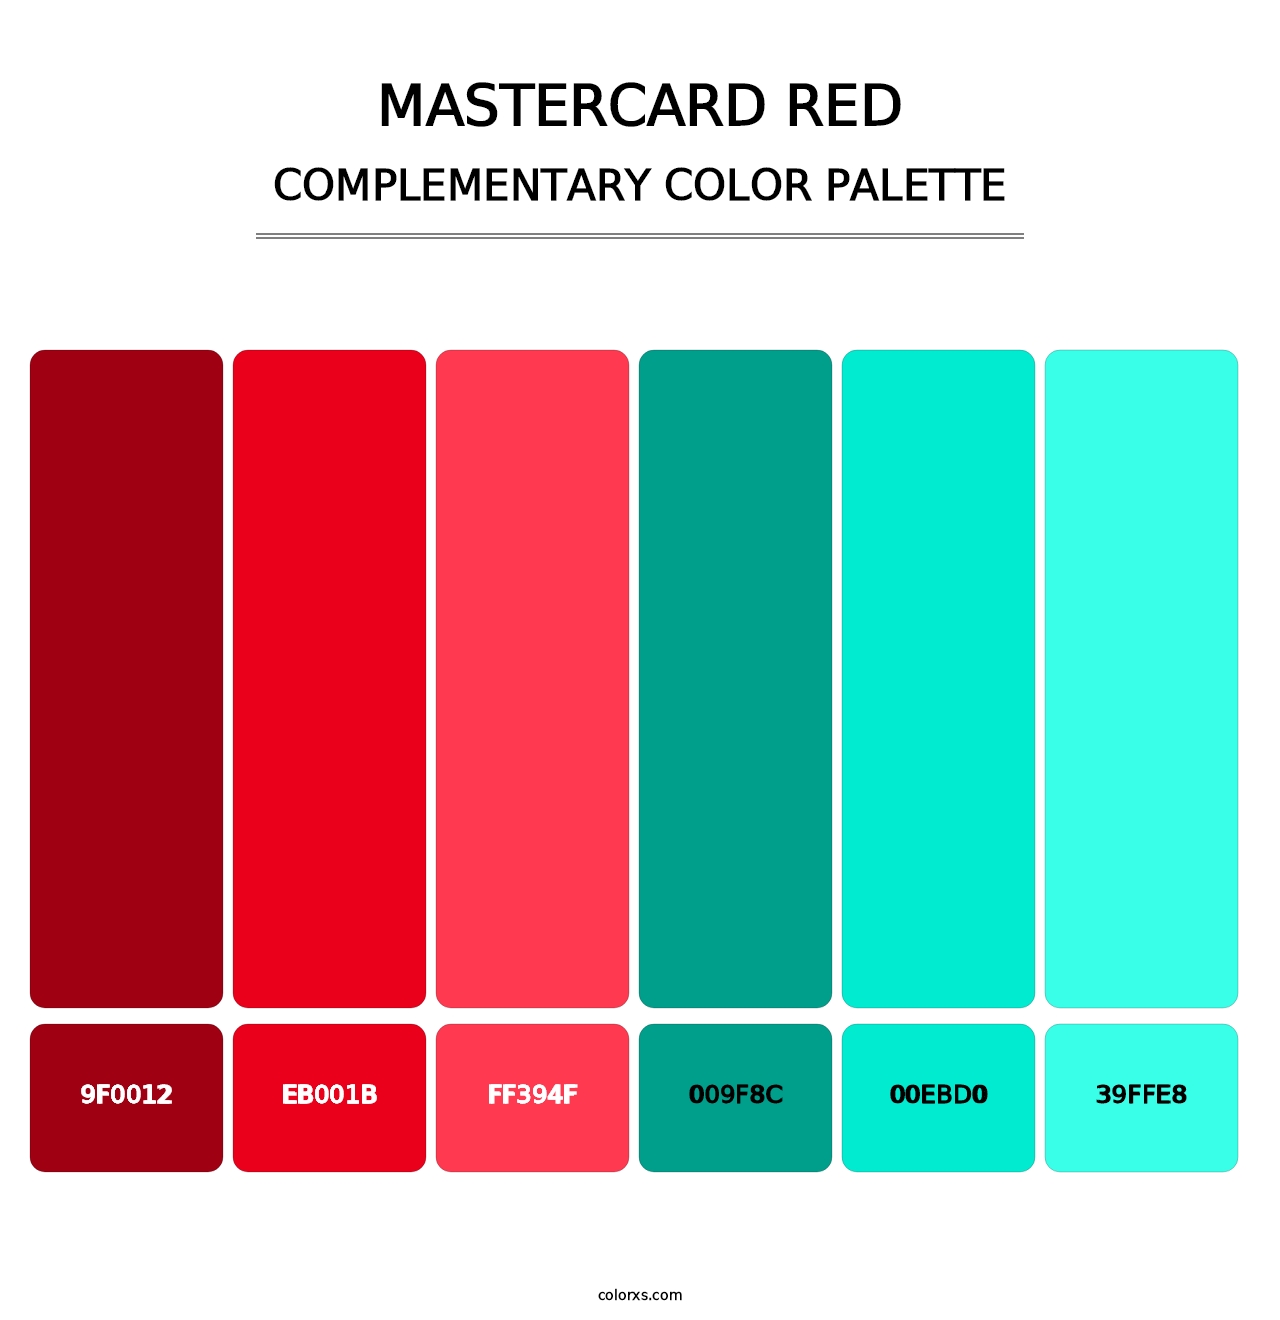 Mastercard Red - Complementary Color Palette